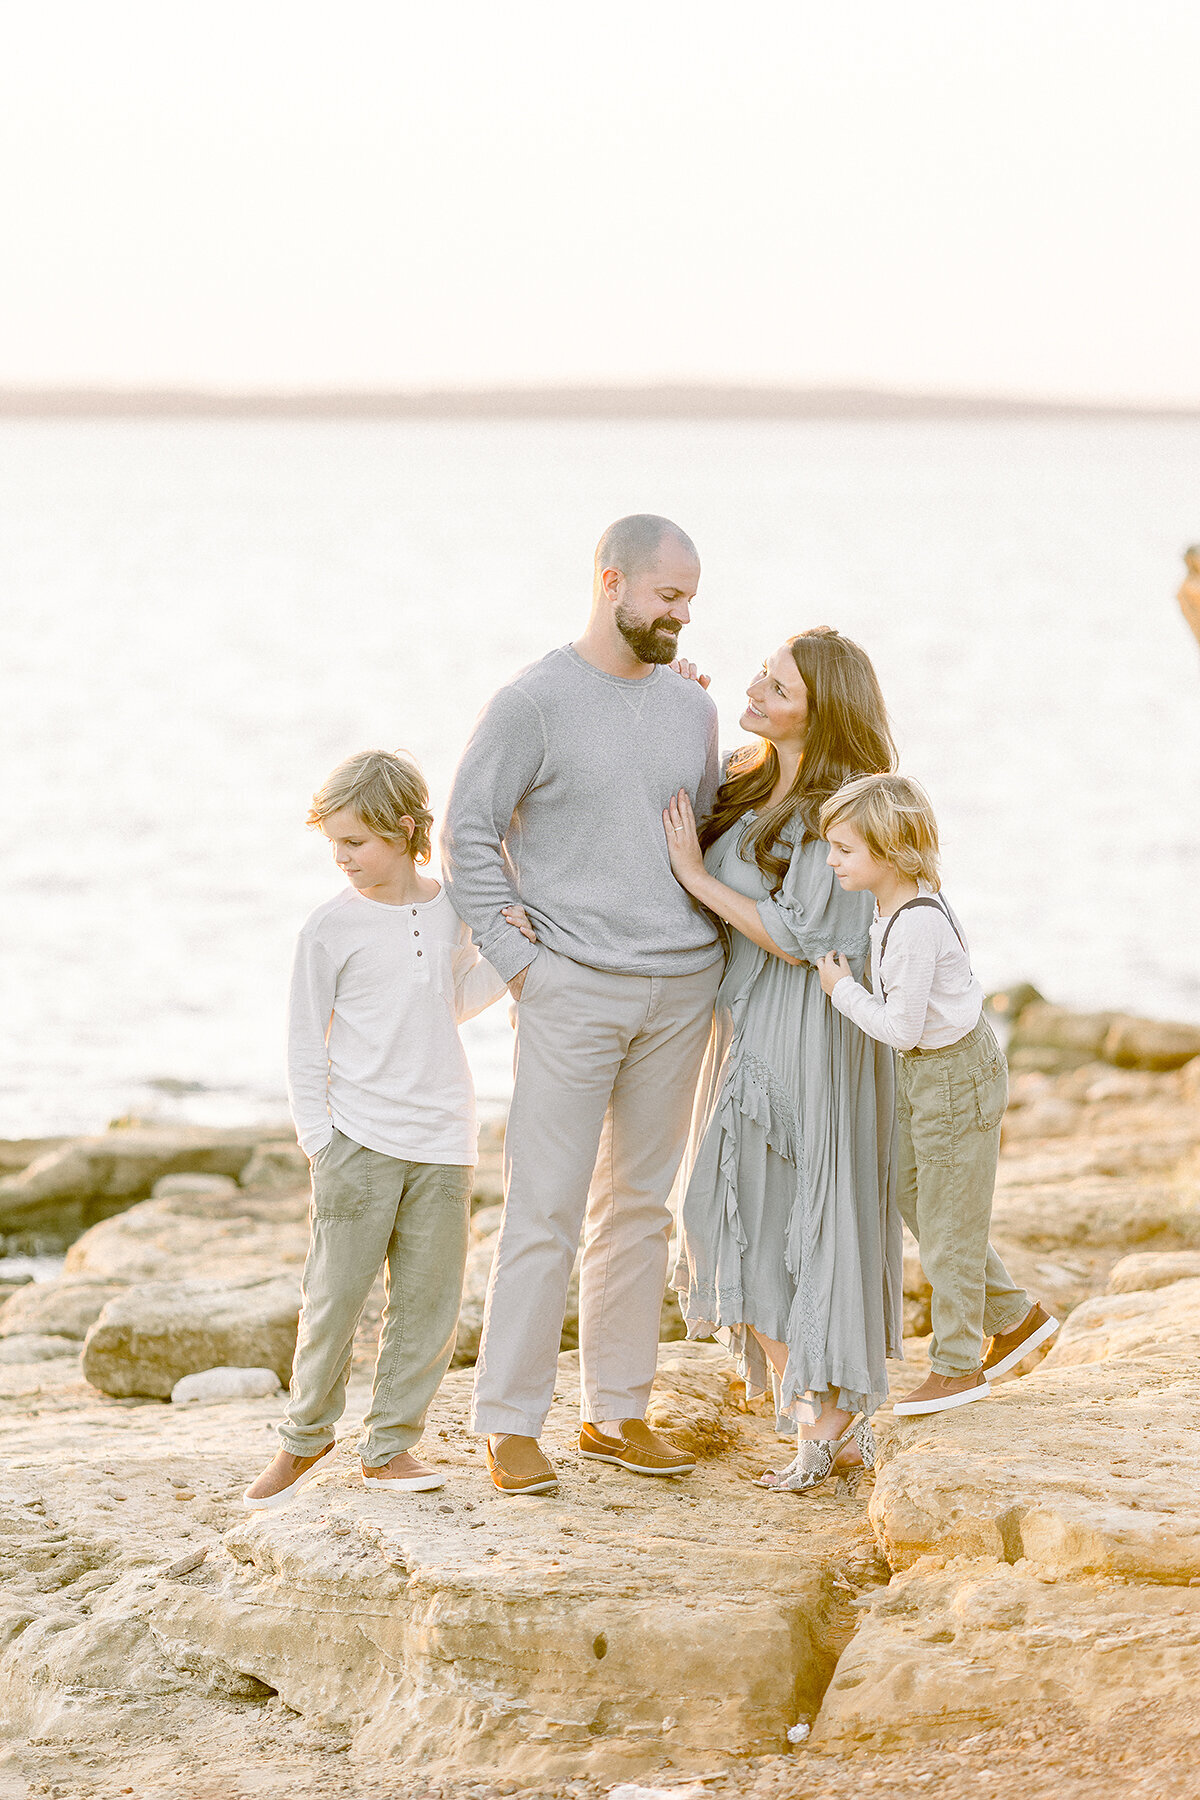 A Frisco Tx Family posing by a lake on the rocks for family photos.